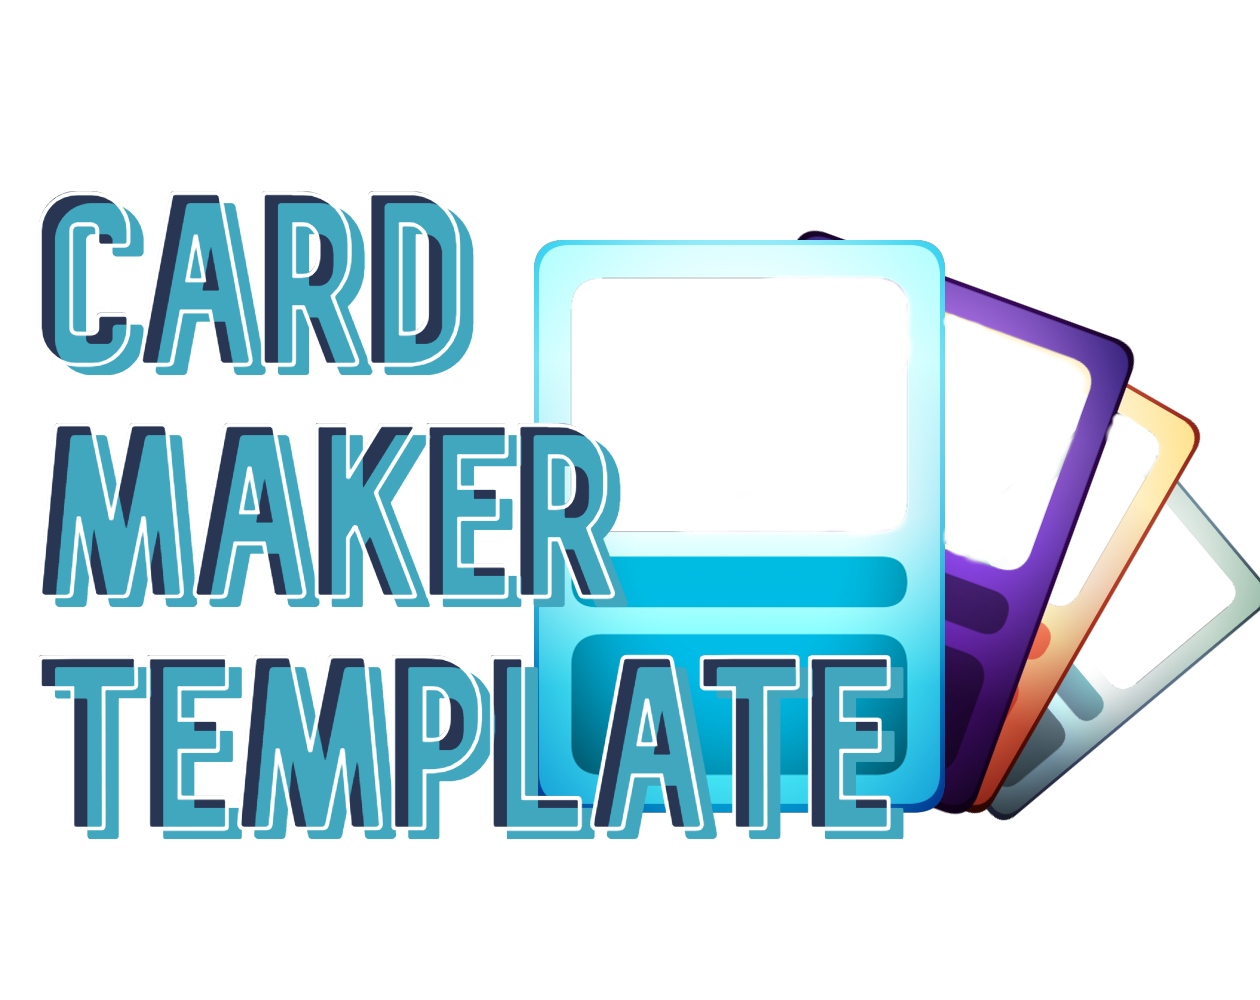 Card Maker Templates - Simply Style